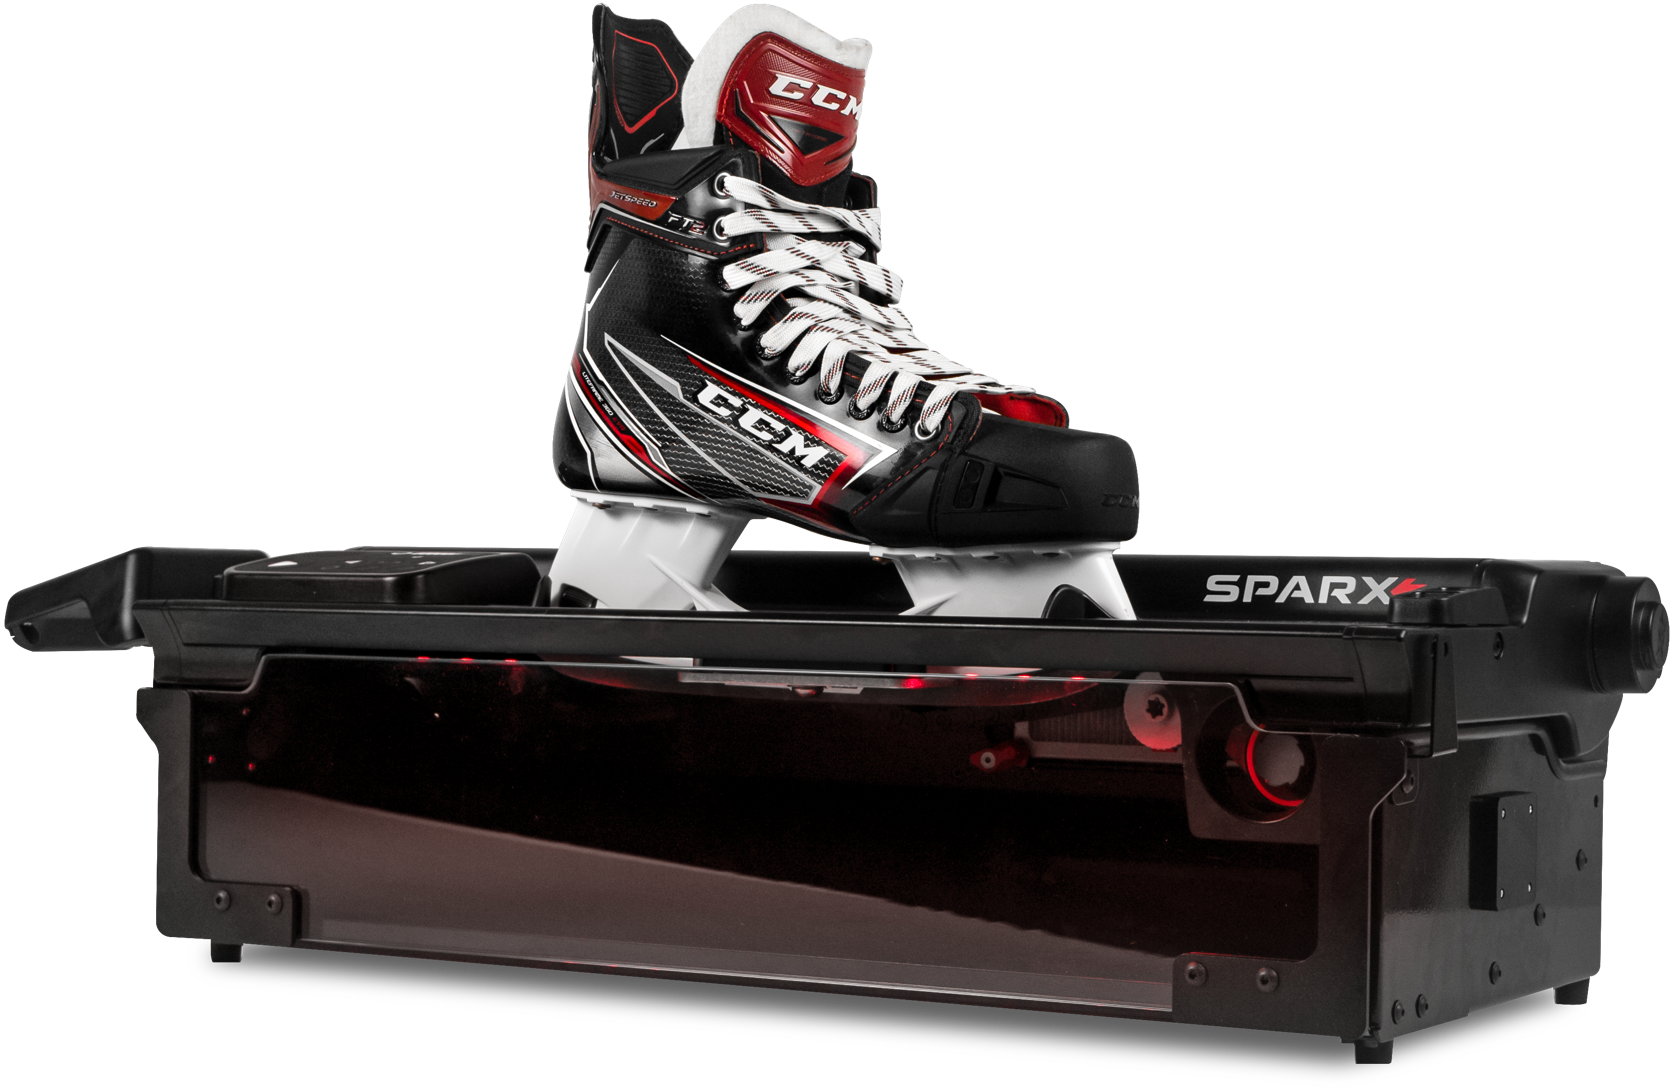 The Sparx Skate Sharpener: The Easiest Way To Sharpen Your Skates At Home 